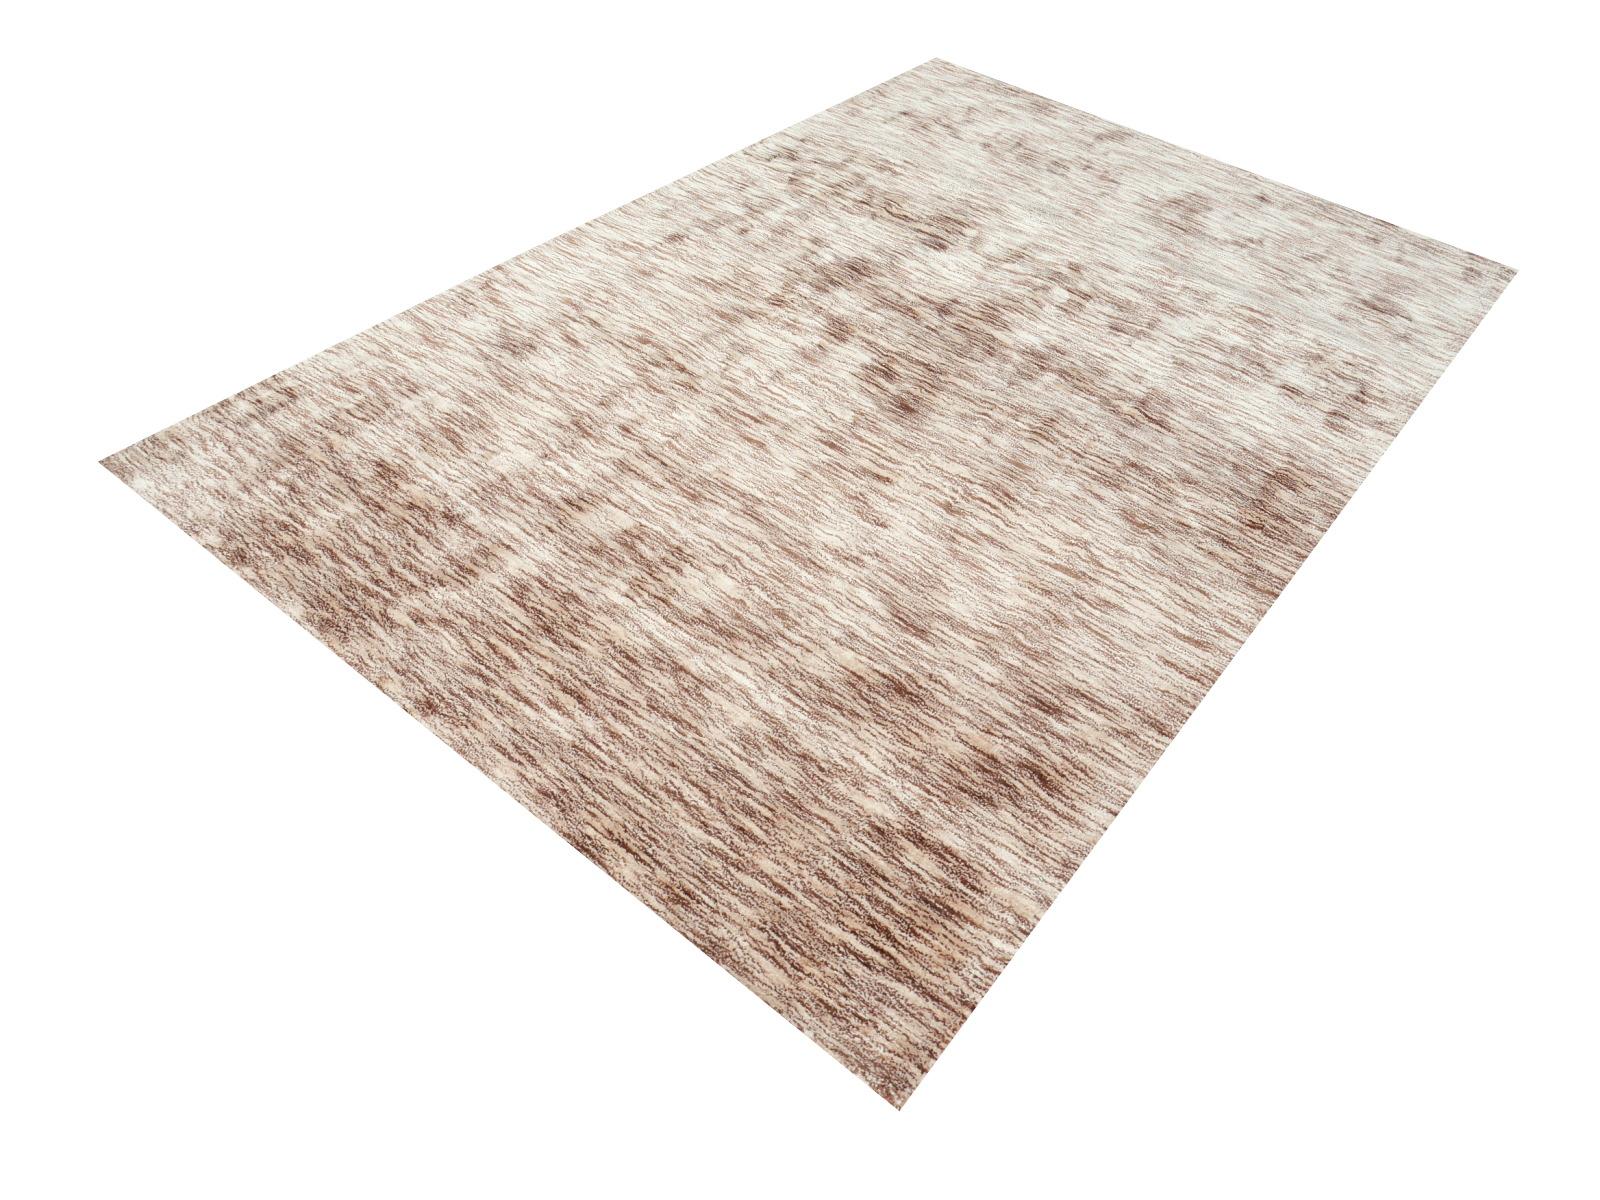 Hand Tufted Tiger Rug in Beige, Brown, Cinnamon 6 x 4 ft, using fine Bamboo Silk.

This light-colored rug has a silk like luster. It was hand-tufted in India with three different colored yarns: beige, cinnamon and brown. The design is a petite tiger